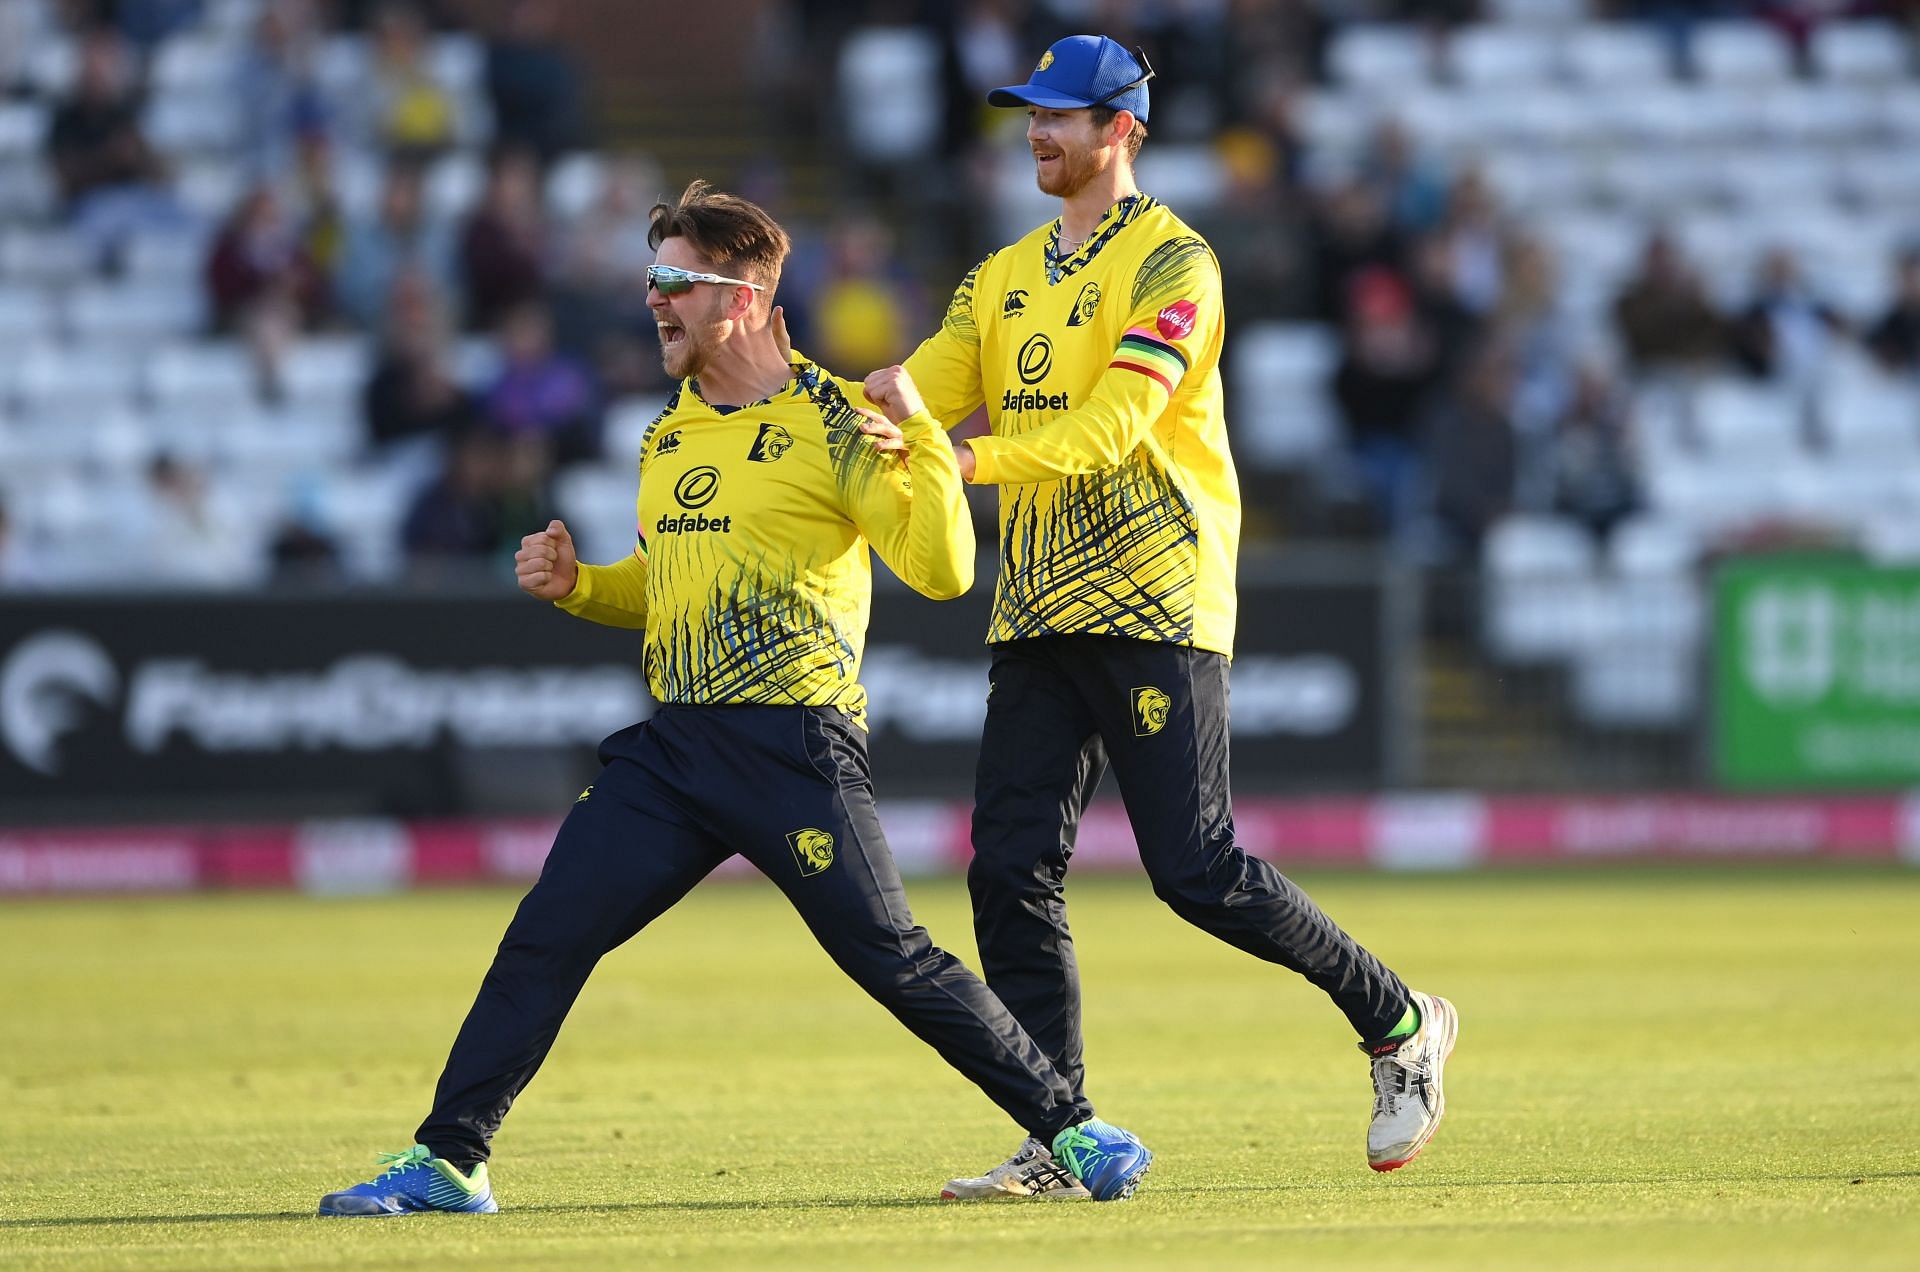 Vitality T20 Blast 2023, Durham vs Lancashire: Probable XIs, Match Prediction, Pitch Report, Weather Forecast and Live Streaming Details